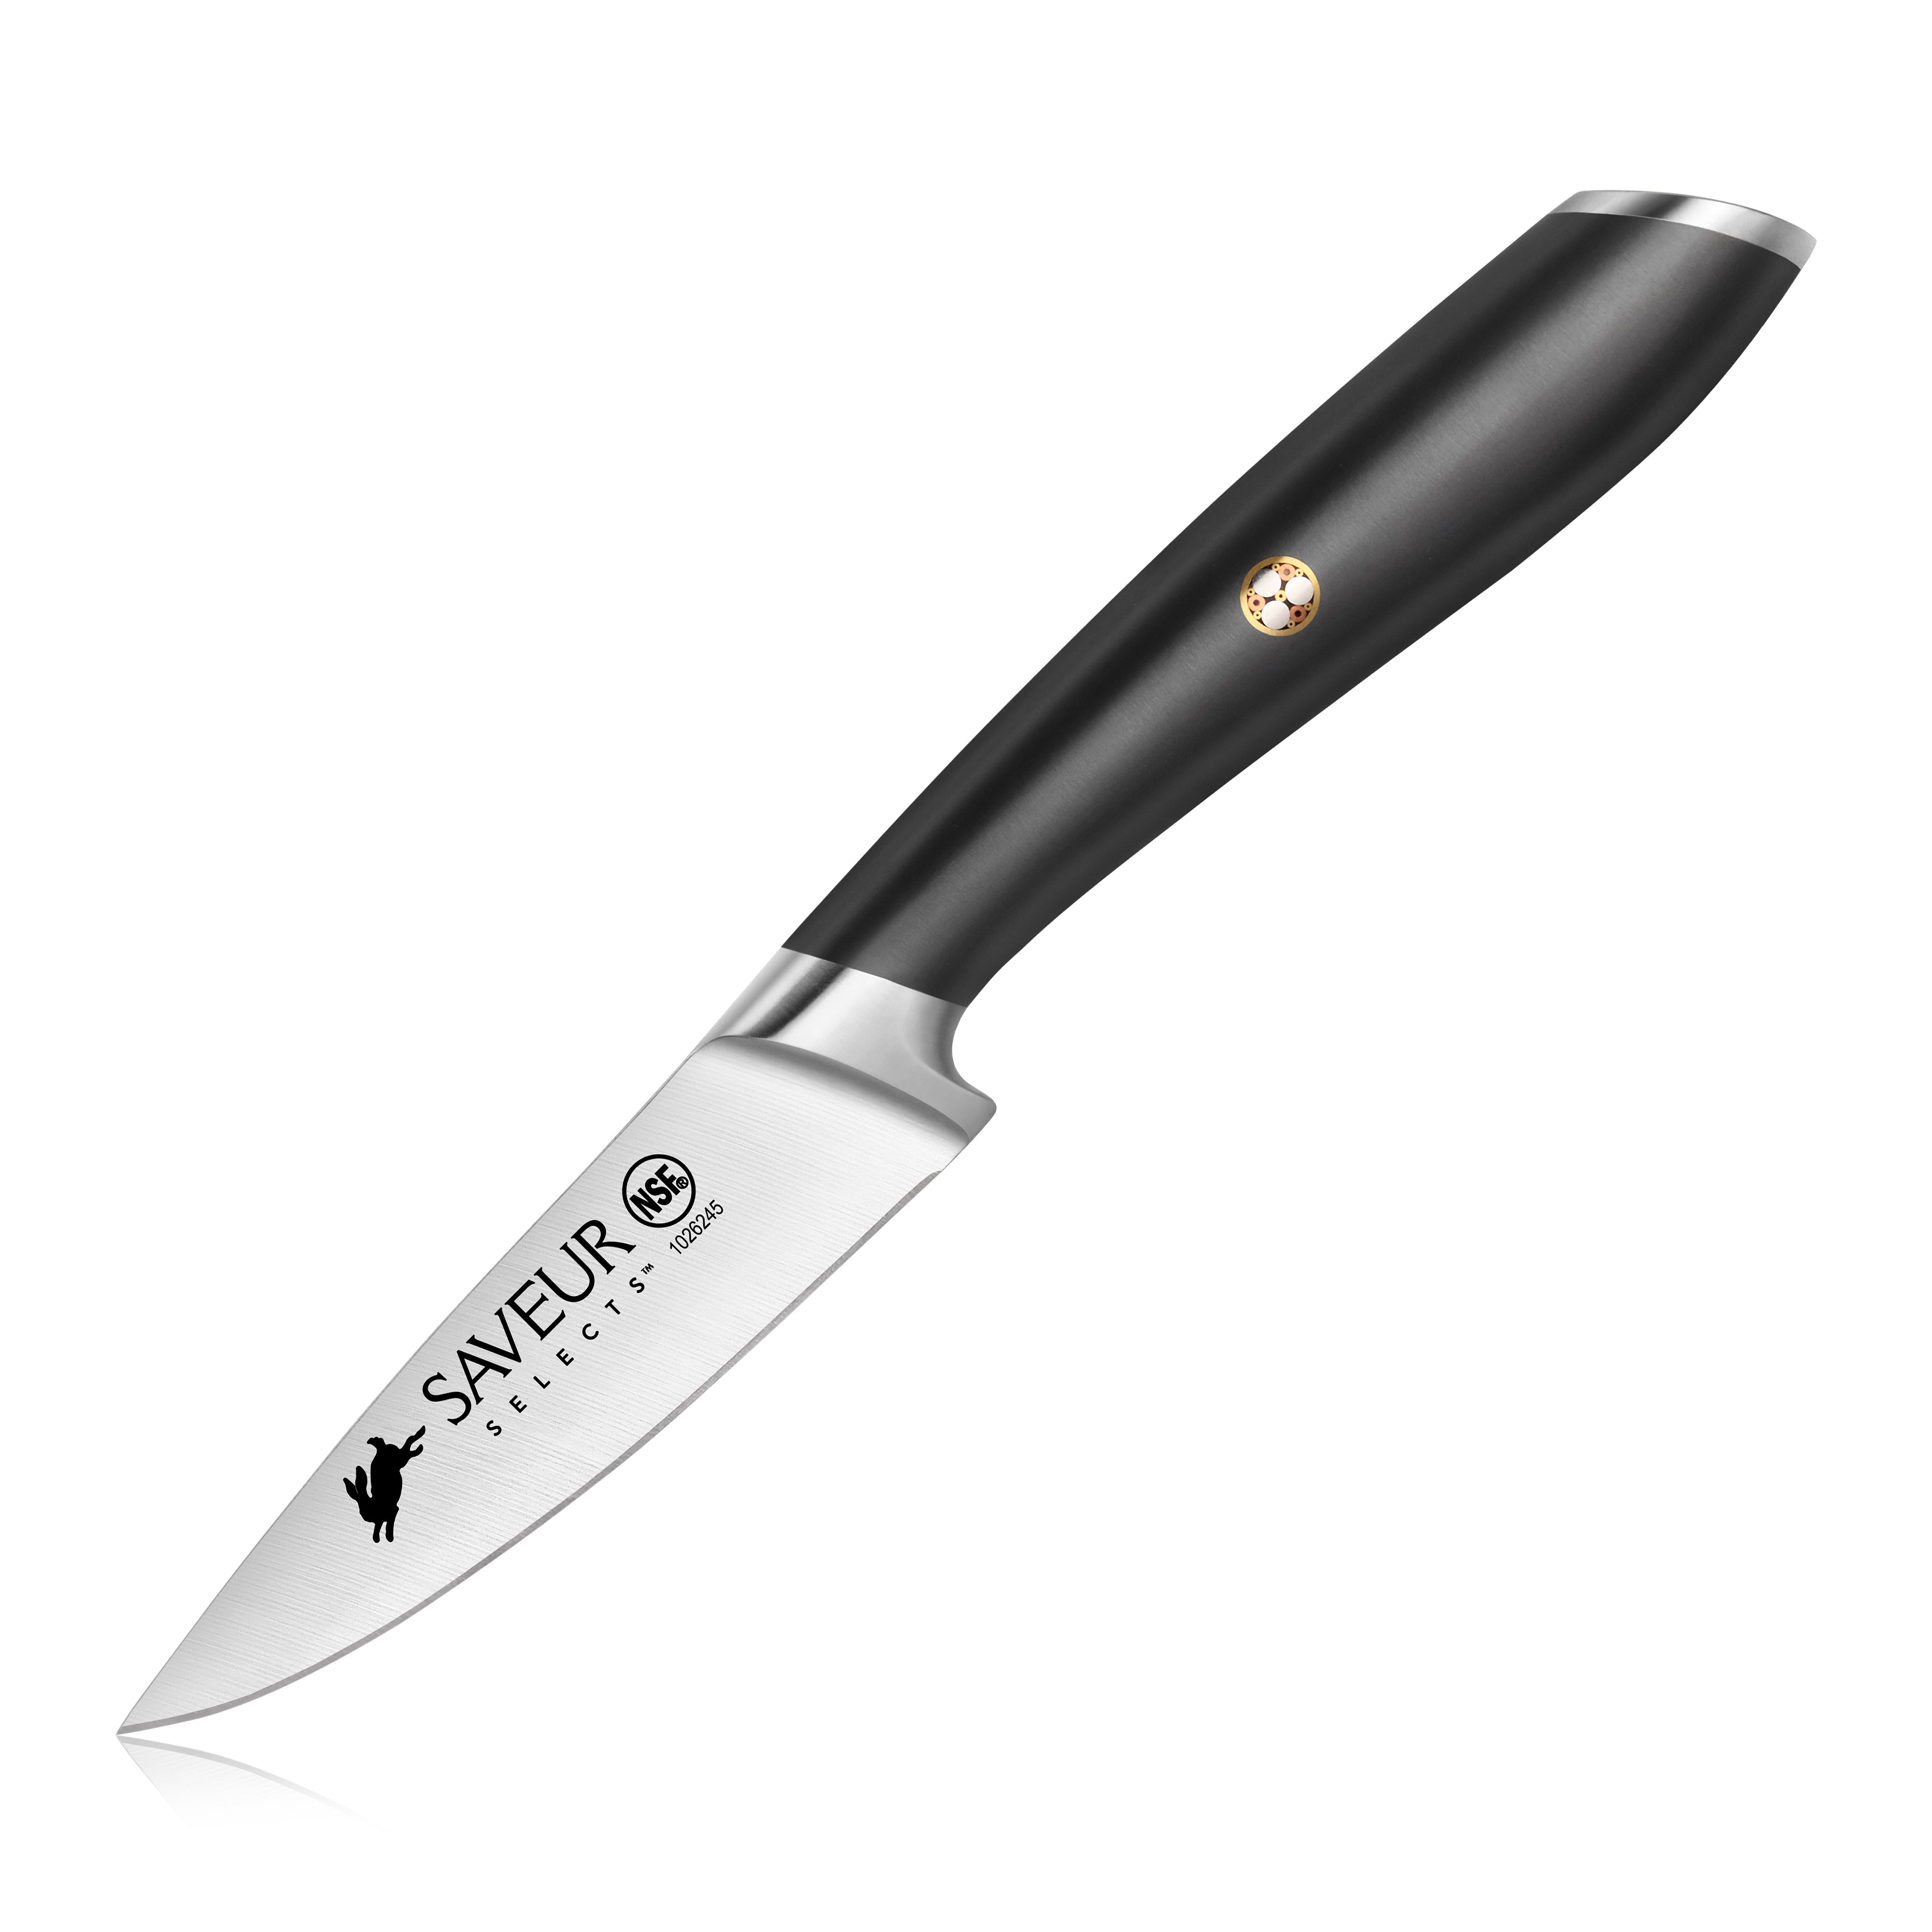 HONJO-MULLER Paring Knife 3.5 Inch - Ultra Sharp Kitchen Knife made from  German Stainless Steel | Professional Small Knife for Cutting, Slicing, and